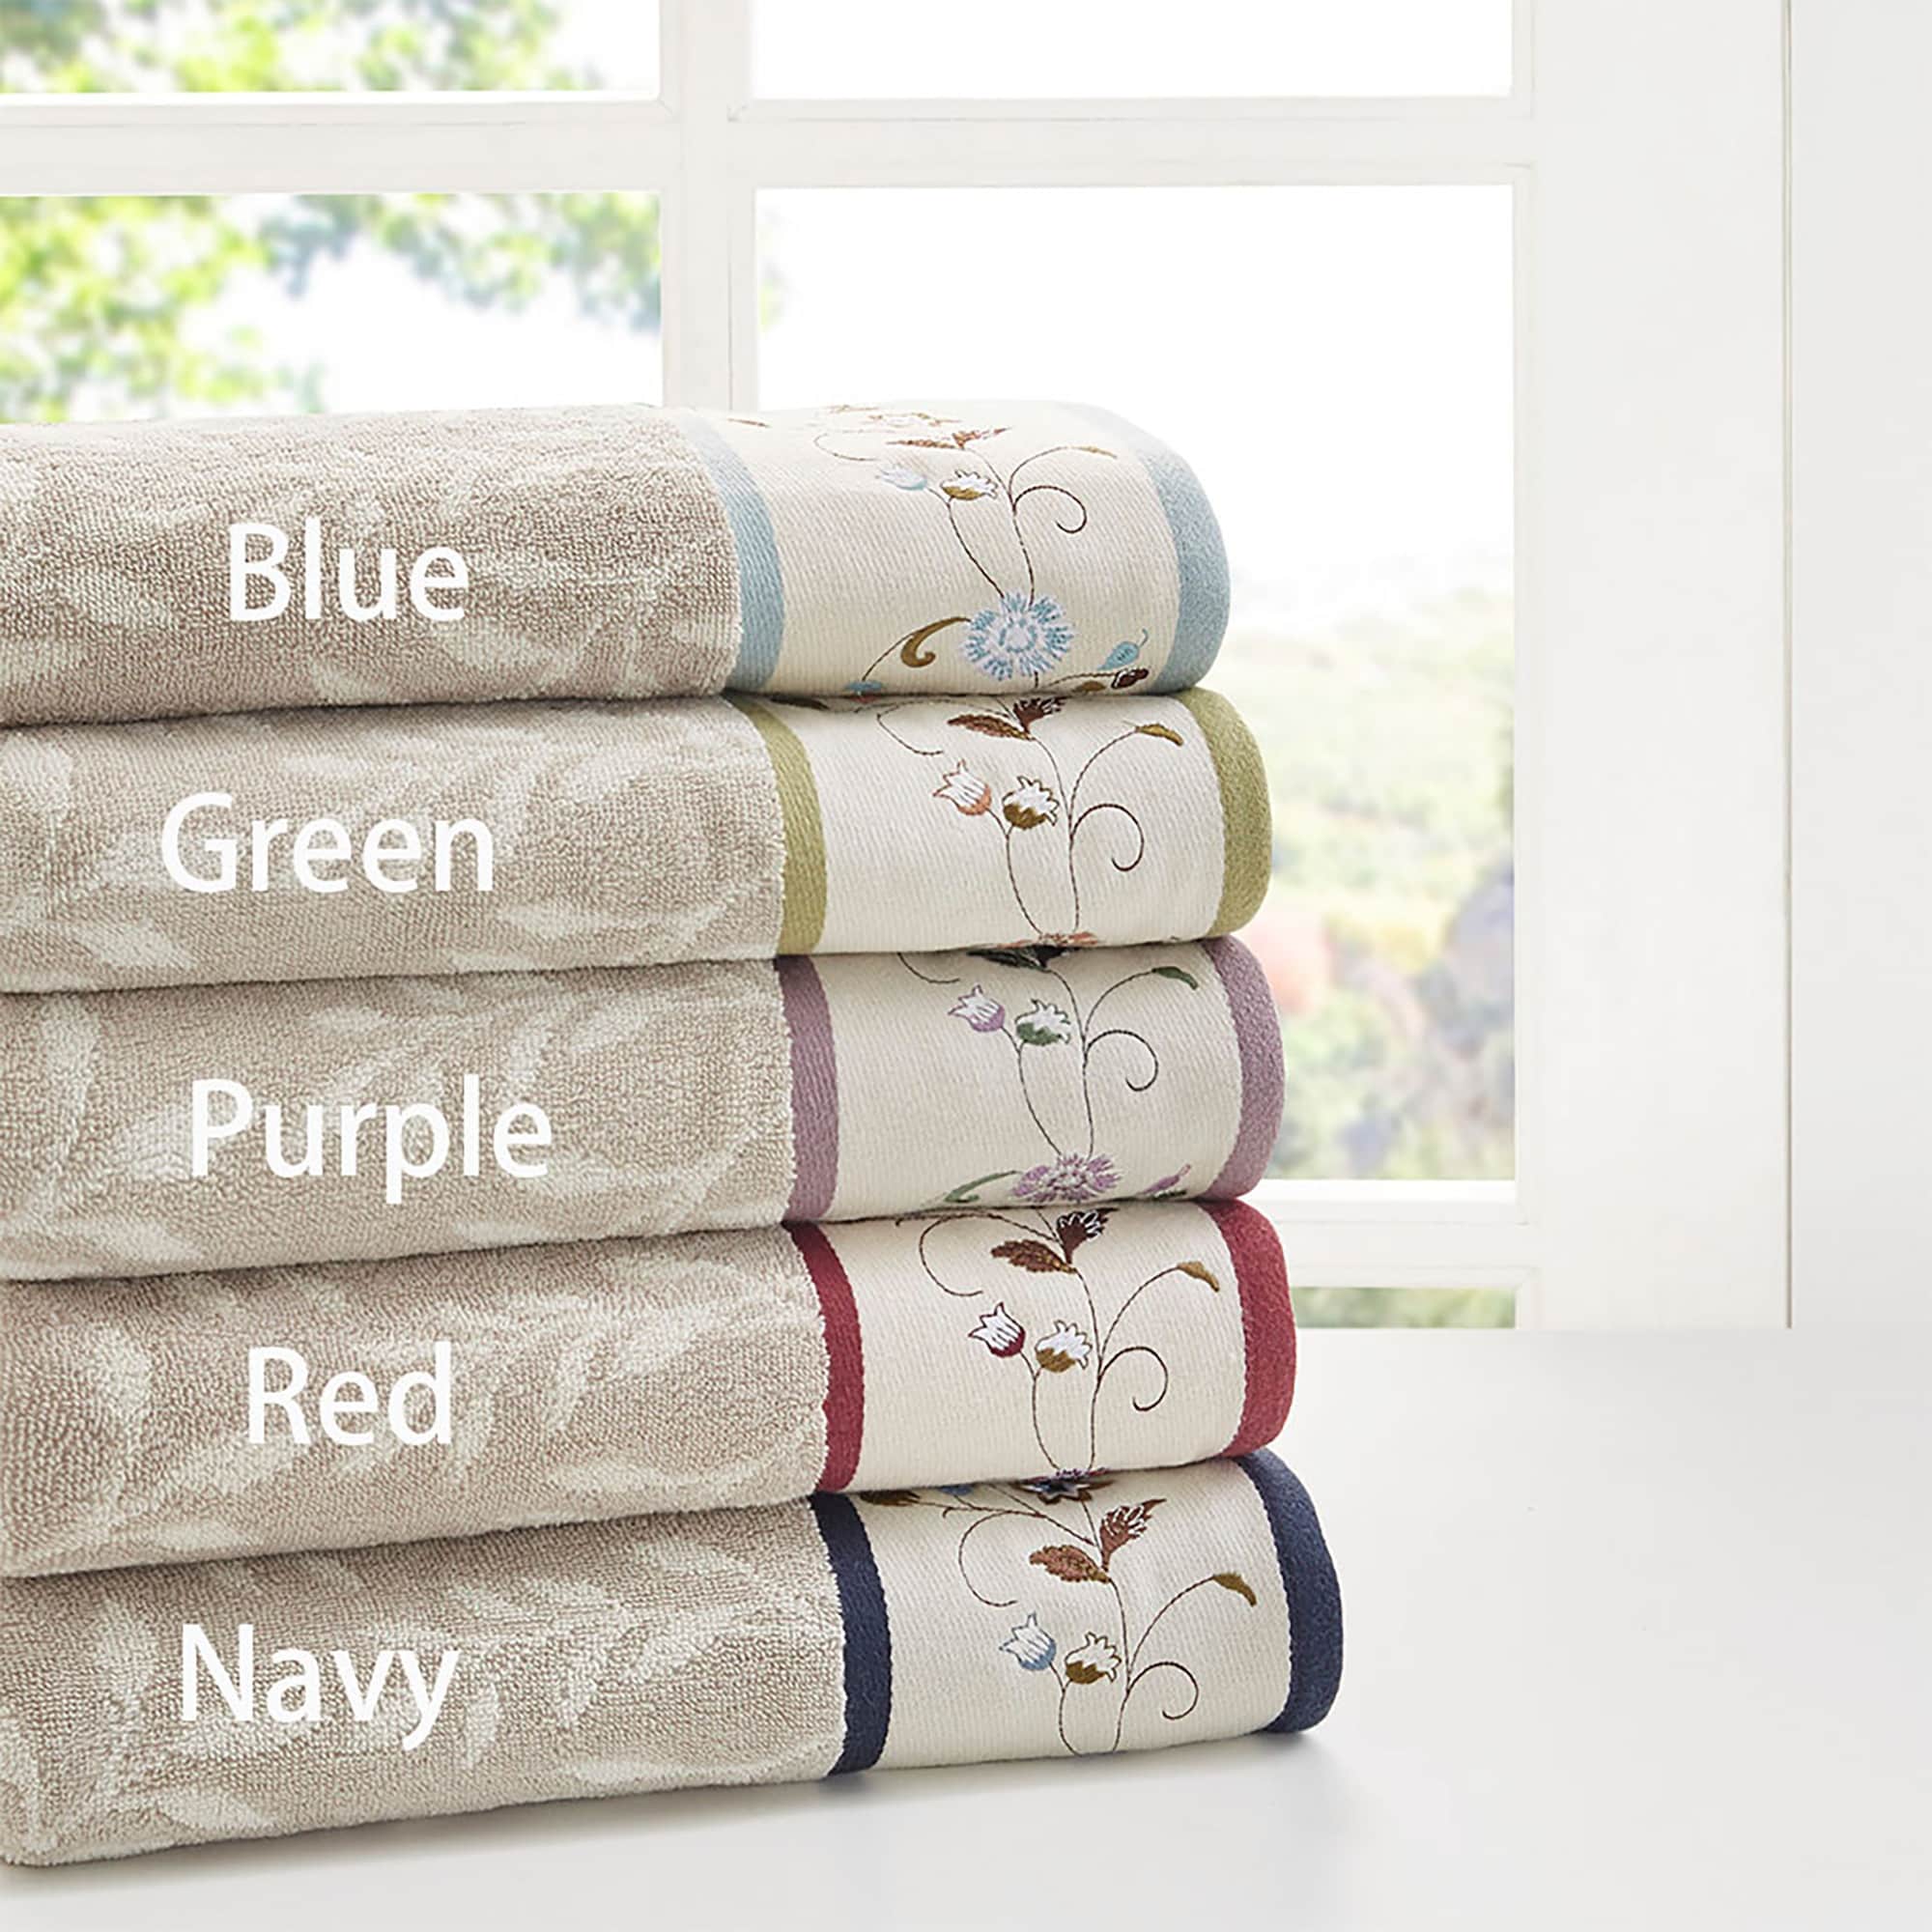 https://ak1.ostkcdn.com/images/products/is/images/direct/8183144e151b9a3ae0fa4707360aad37ca15c303/Madison-Park-Belle-Embroidered-Cotton-Jacquard-6-piece-Towel-Set.jpg